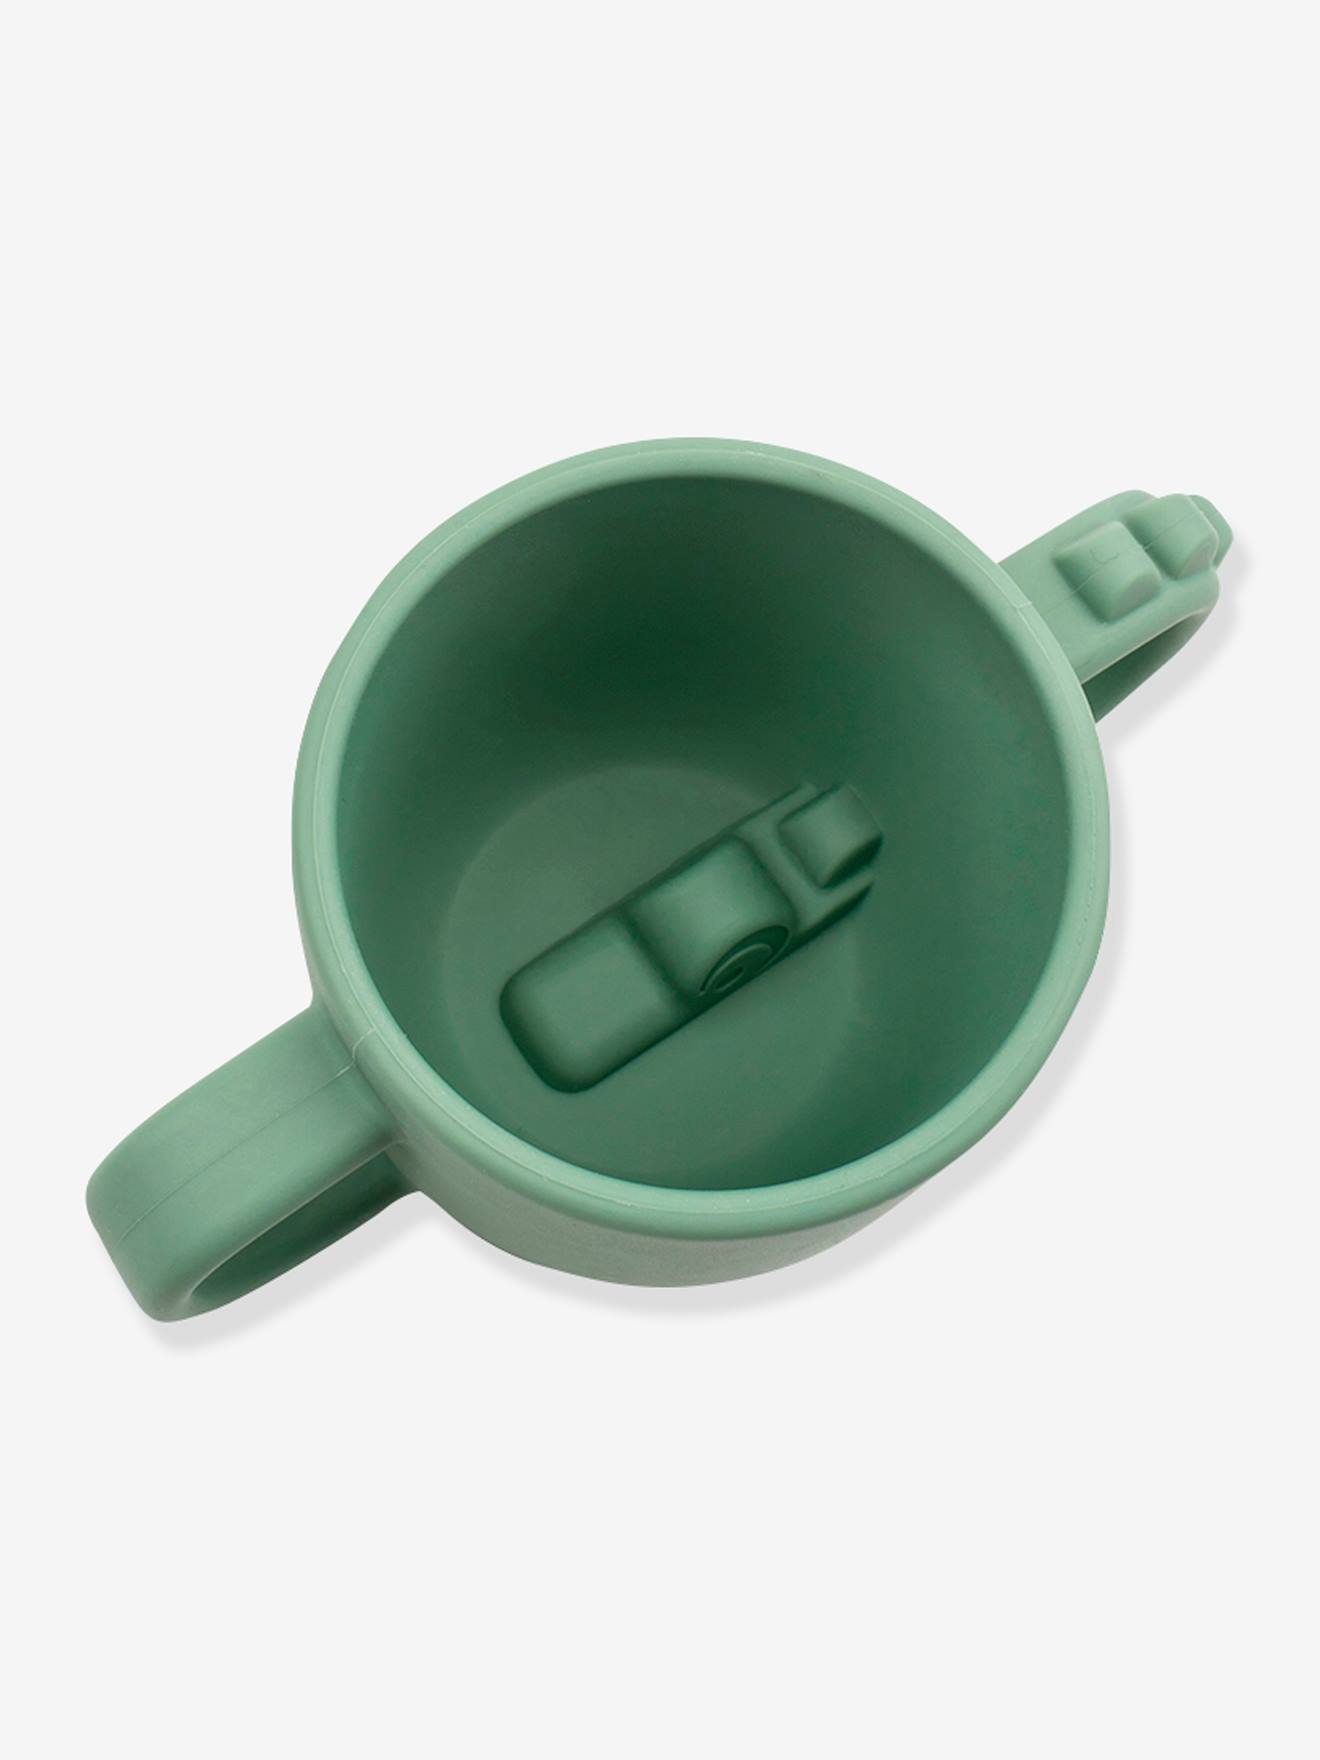 Croco Peekaboo 2-Handle Cup in Silicone, DONE BY DEER green light solid